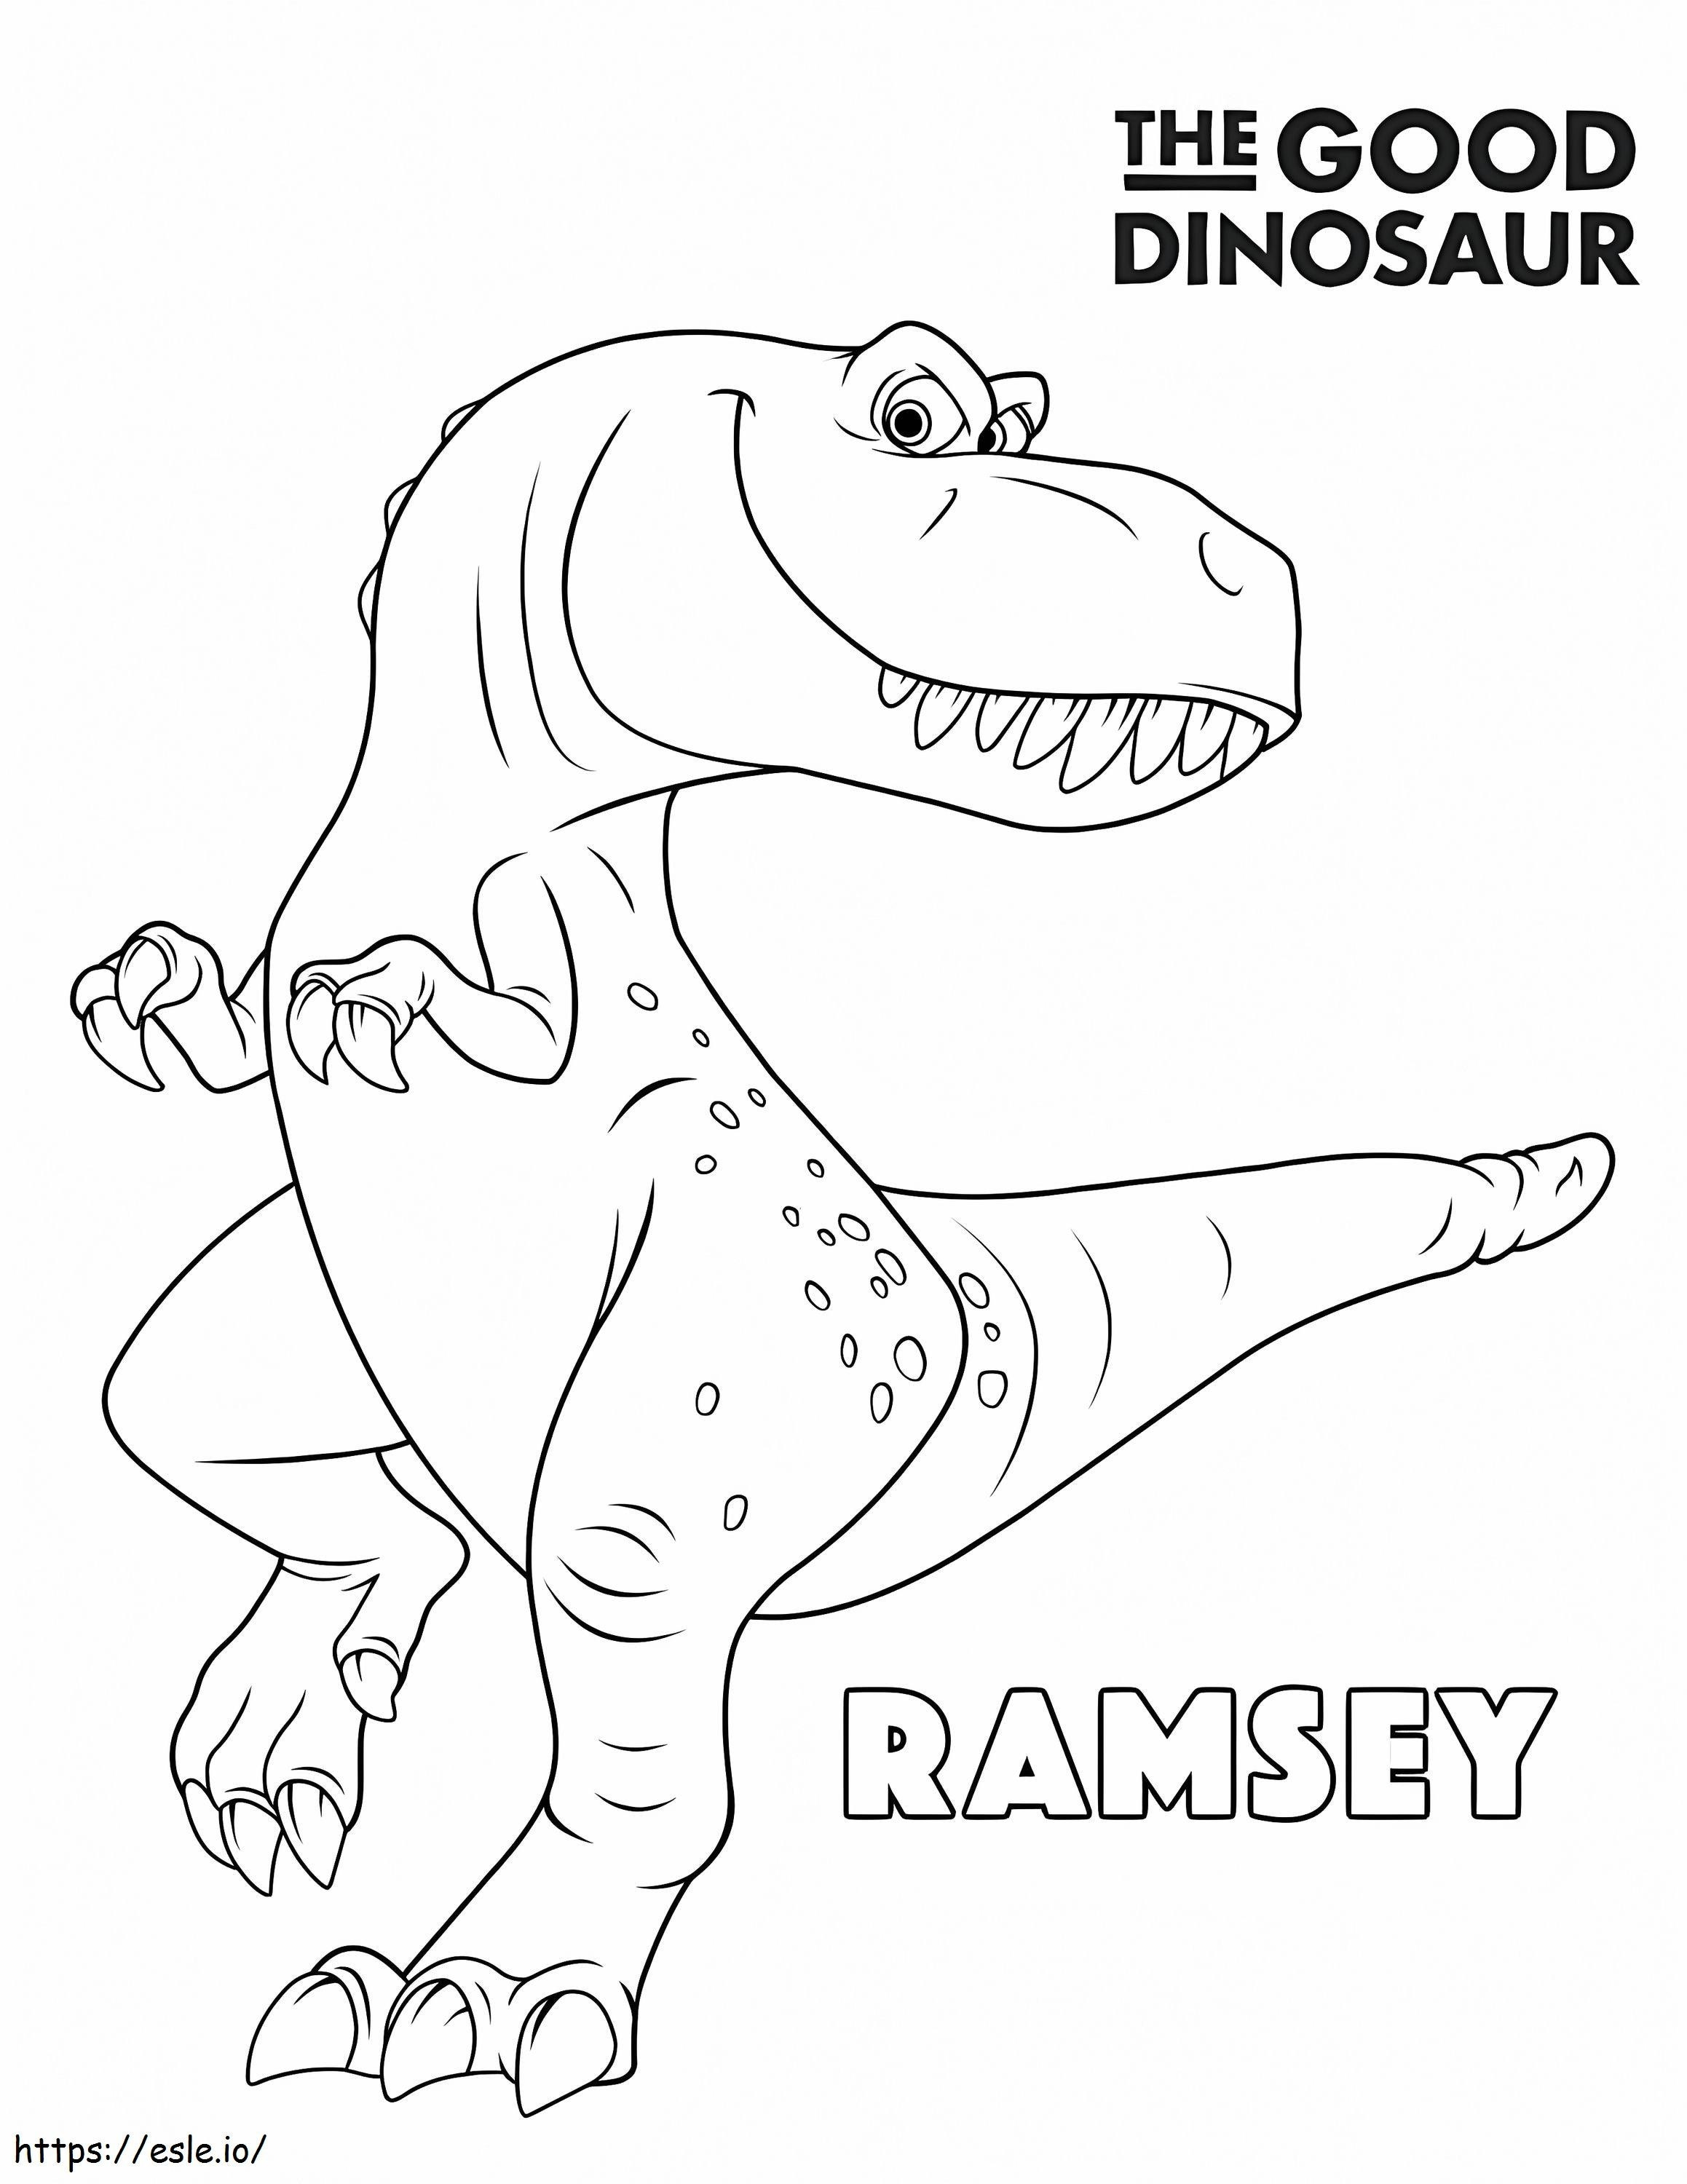 Ramsey From The Good Dinosaur coloring page